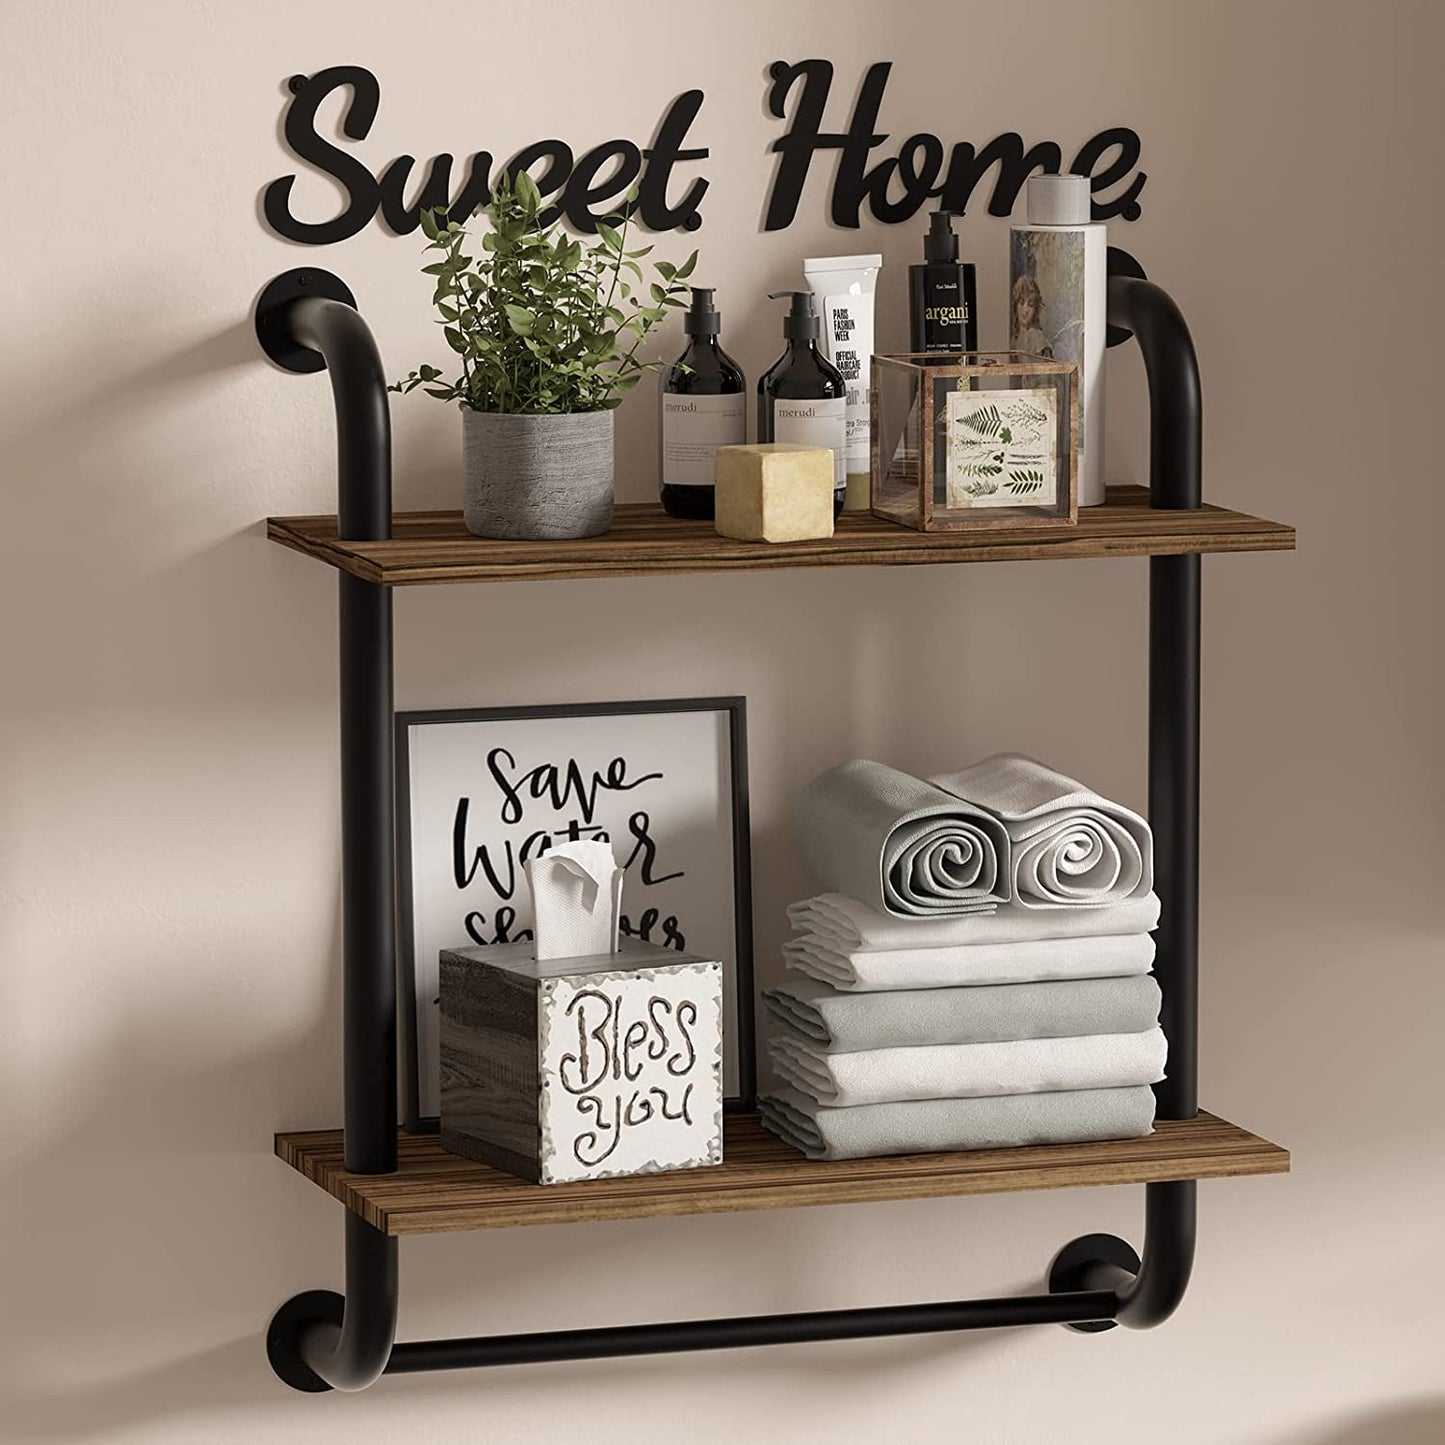 Bathroom Shelves Wall Mounted, Industrial Pipe Shelving 2-Tier, Rustic Farmhouse Shelves for Wall Decor, Floating Bathroom Shelf Over Toilet with Towel Bar for Kitchen, Bedroom, Living Room 17.3 inch